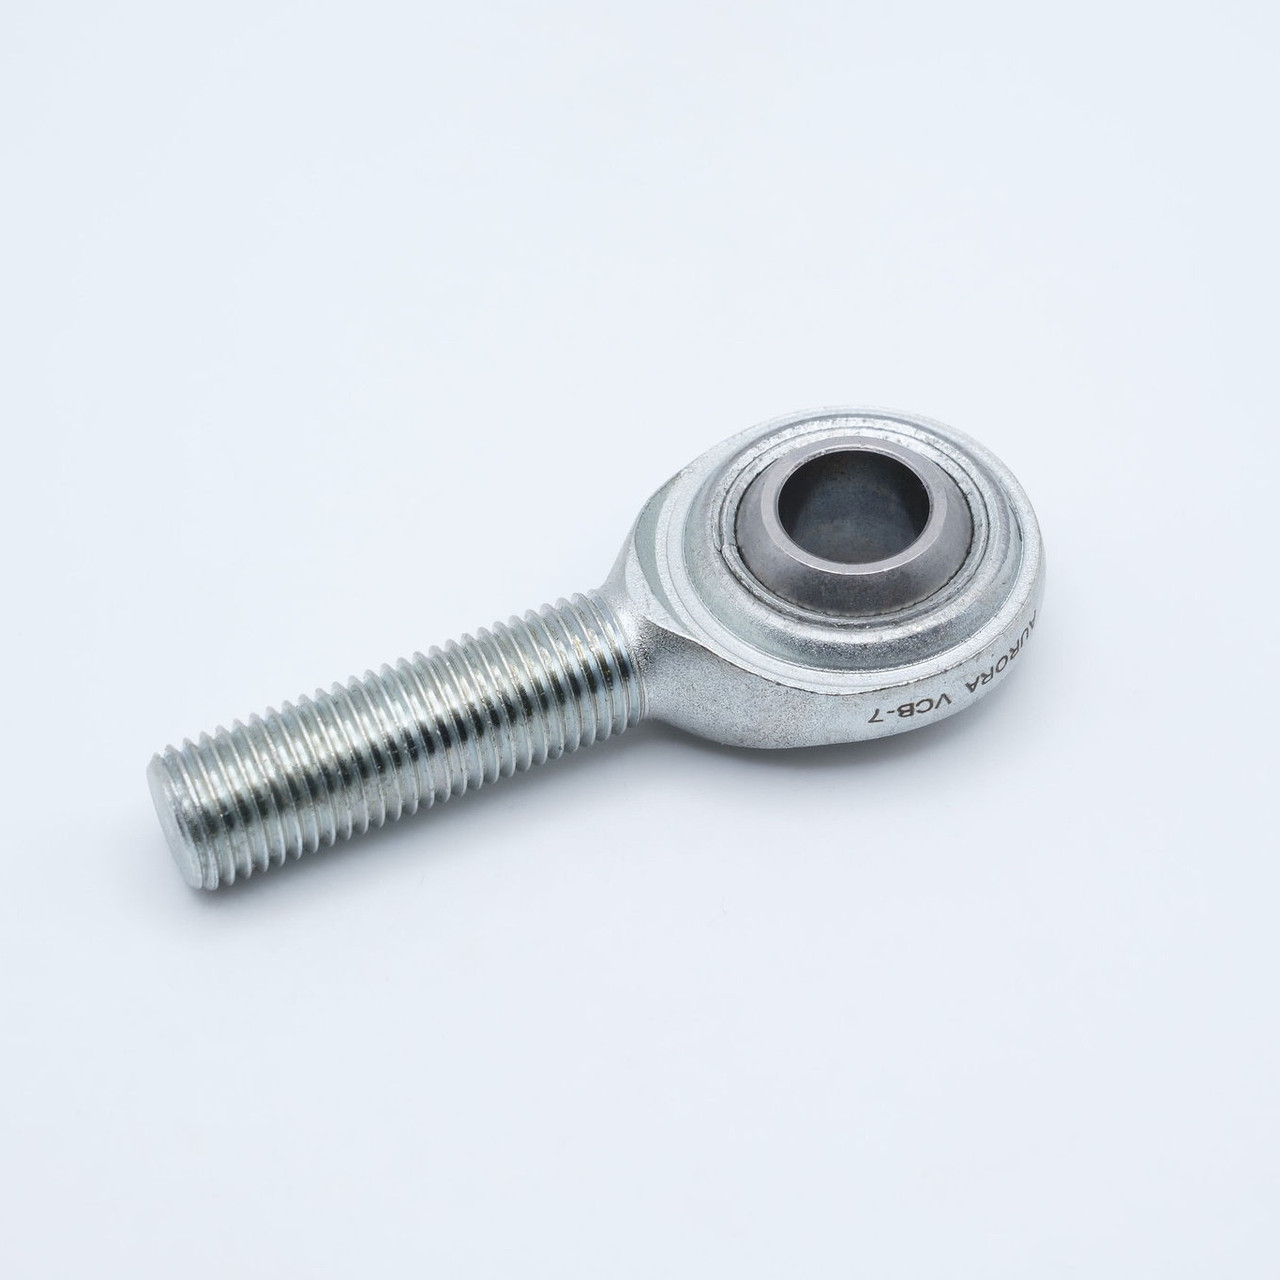 VCB-8 Rod-End Bearing 1/2" Bore Right Angled View